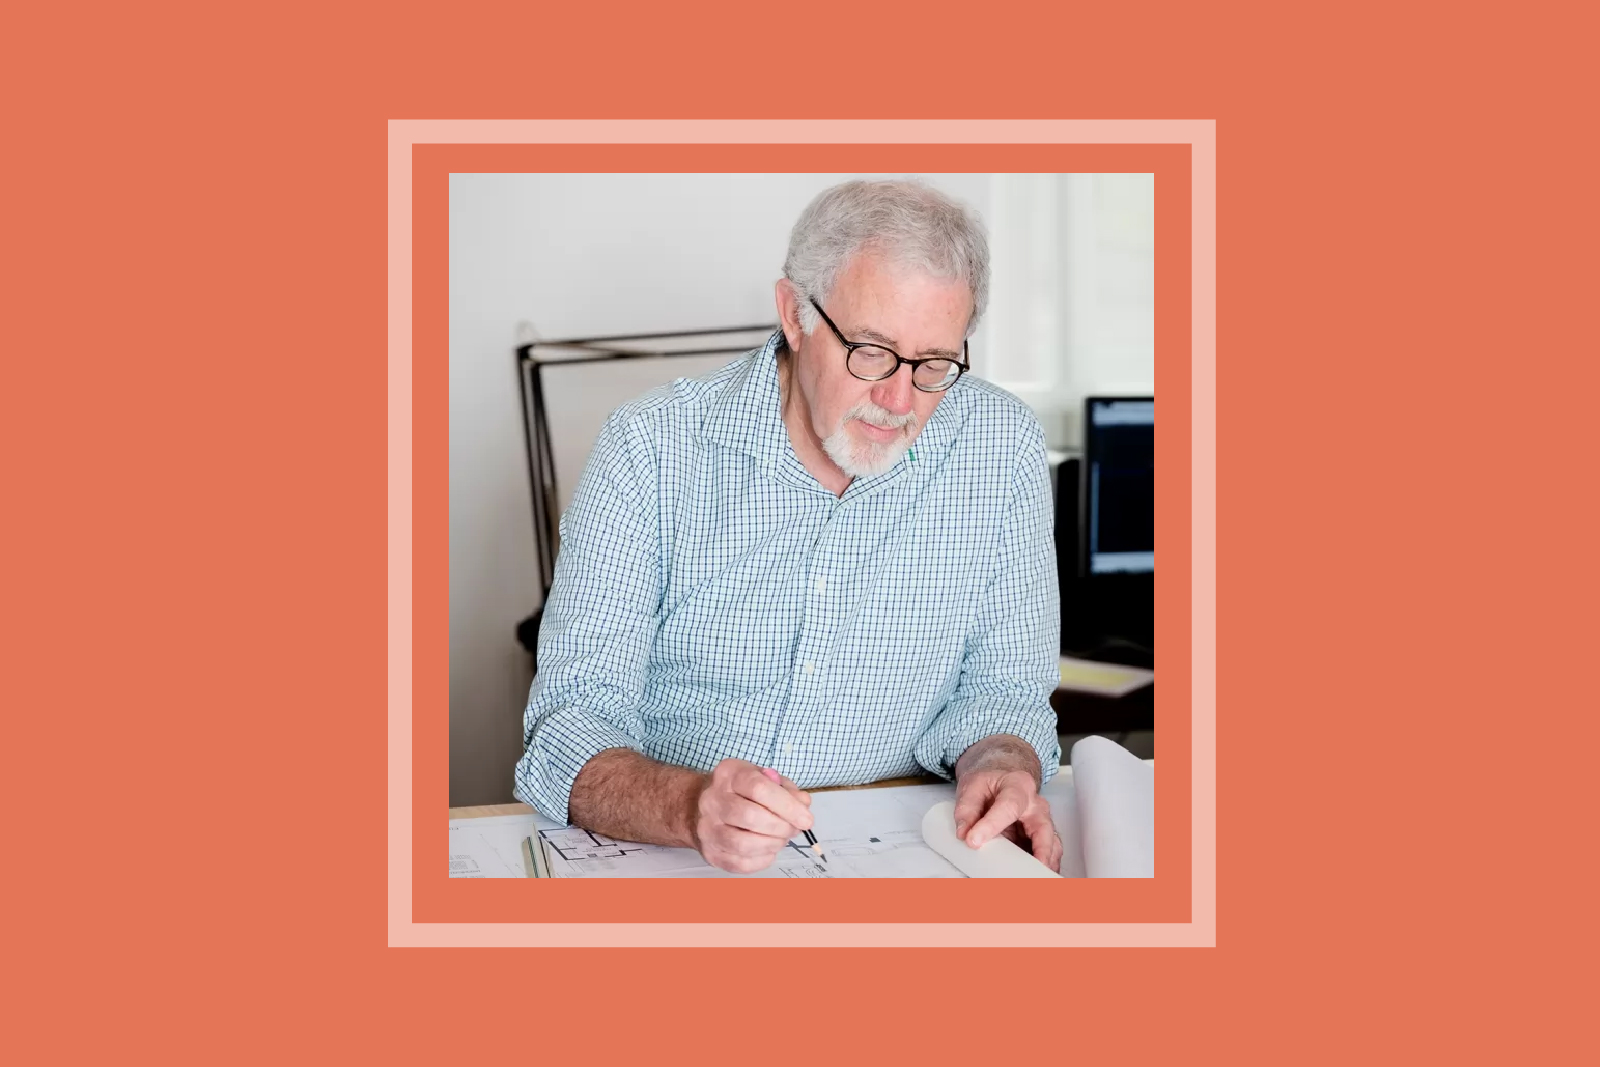 image of older man with glasses sitting in a desk chair drawing